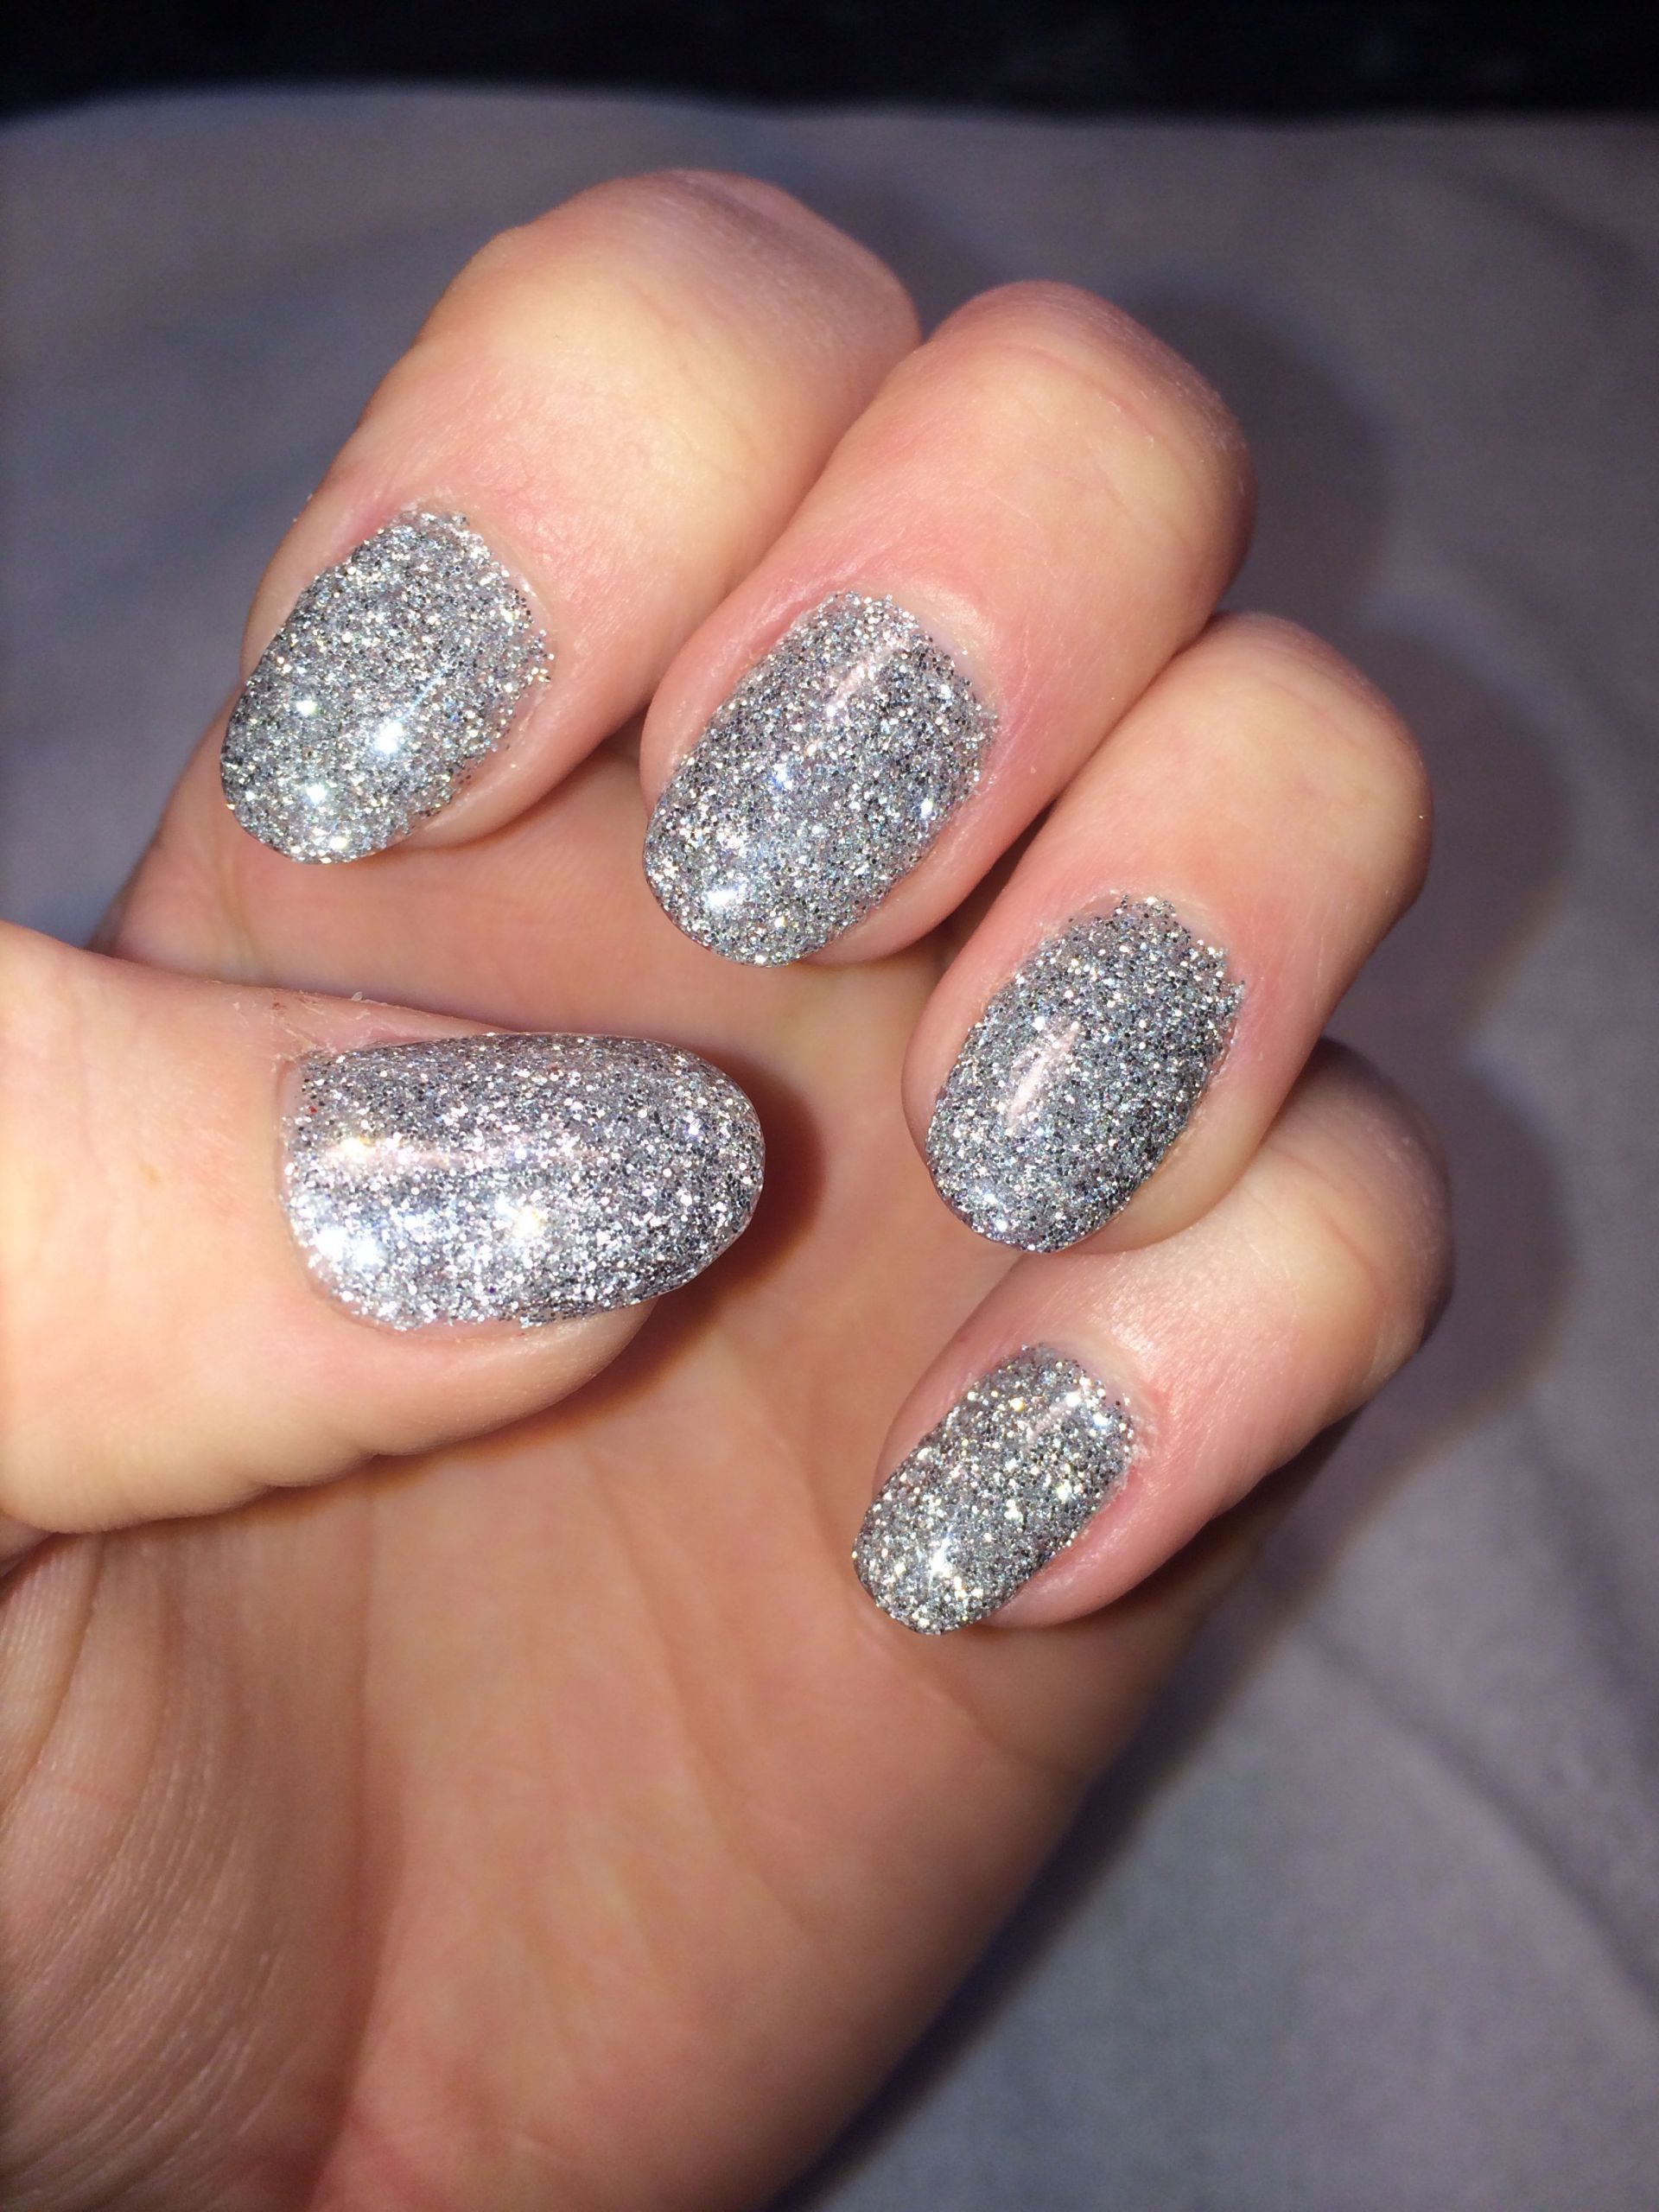 Sns Glitter Nails
 SNS dipping system with added tips and Artiglio glitter